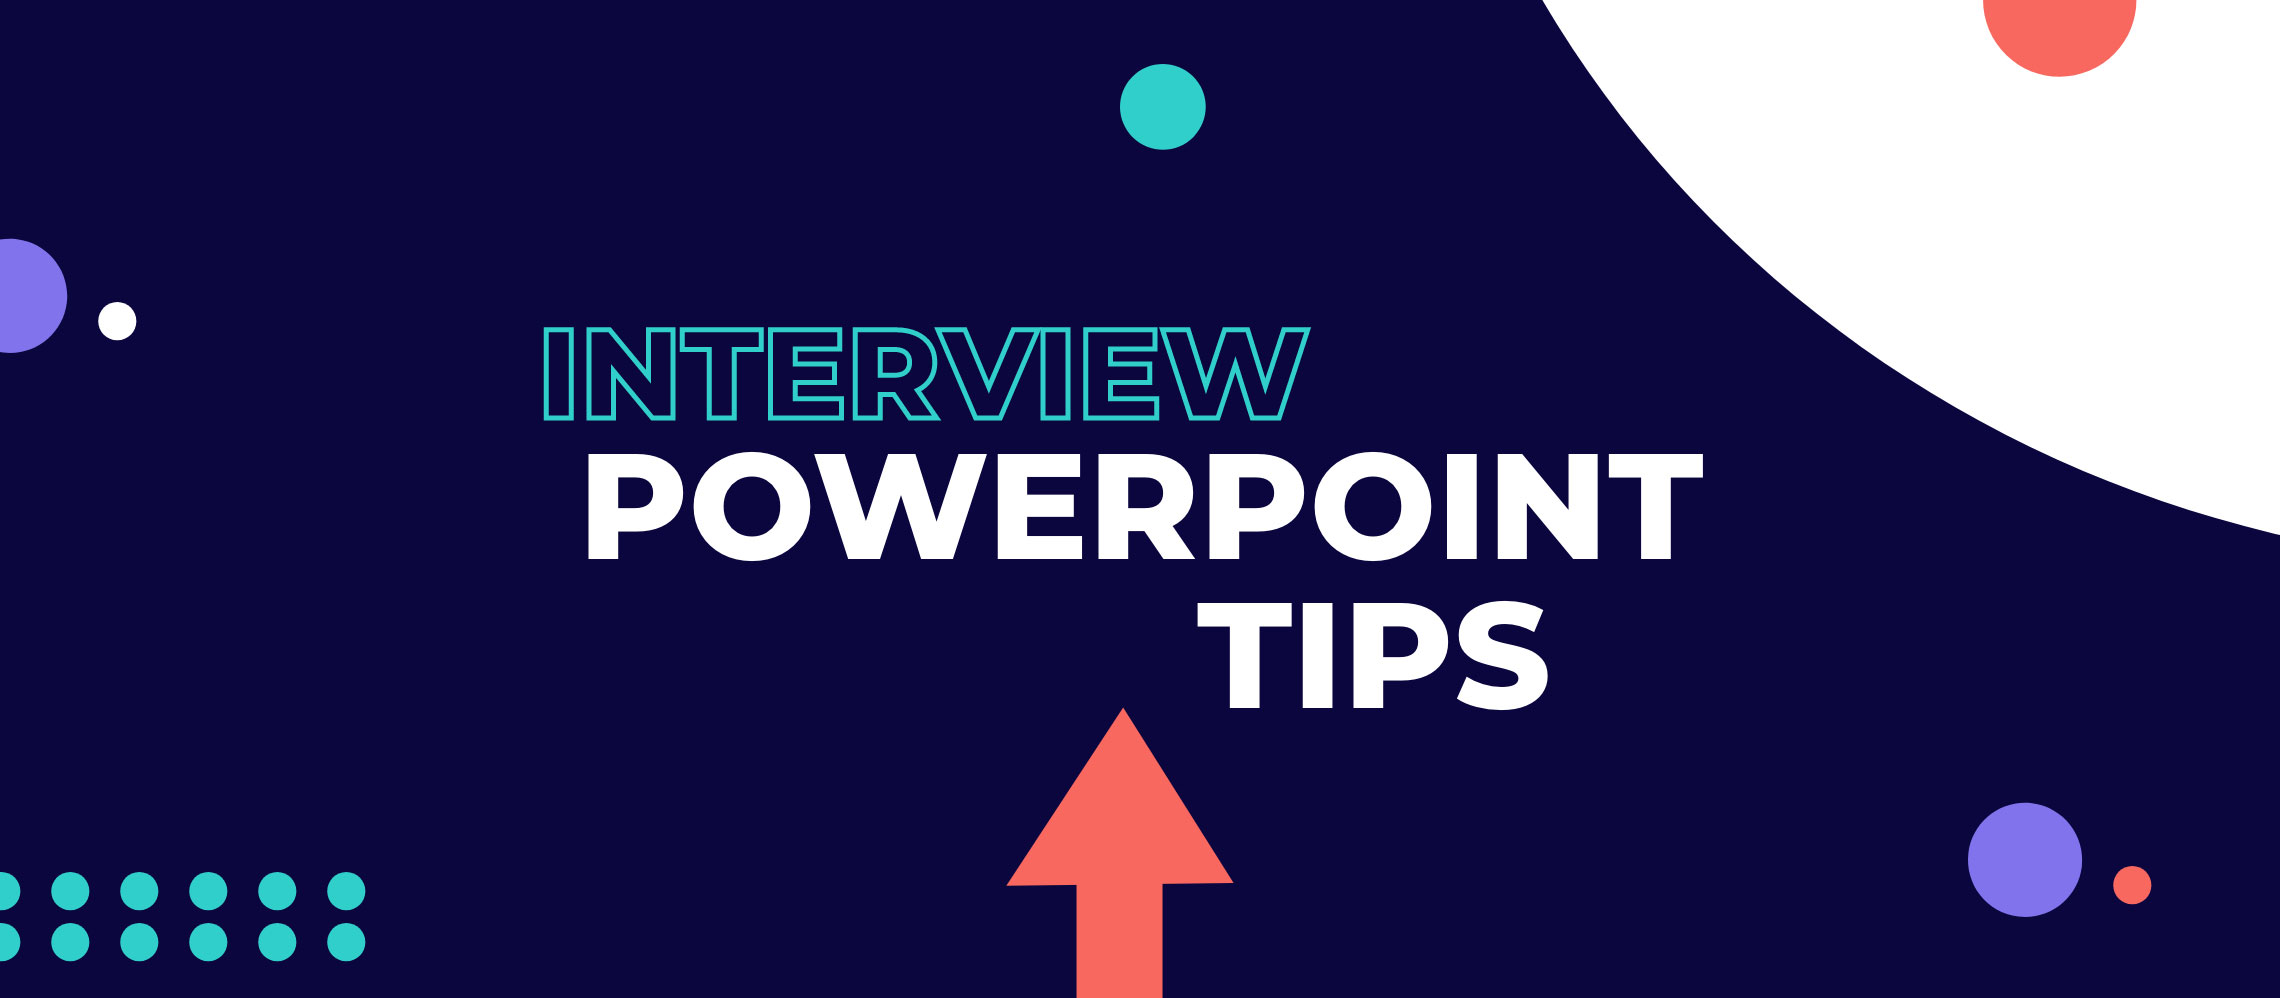 Interview PowerPoint presentations: 7 tips to get your dream job.